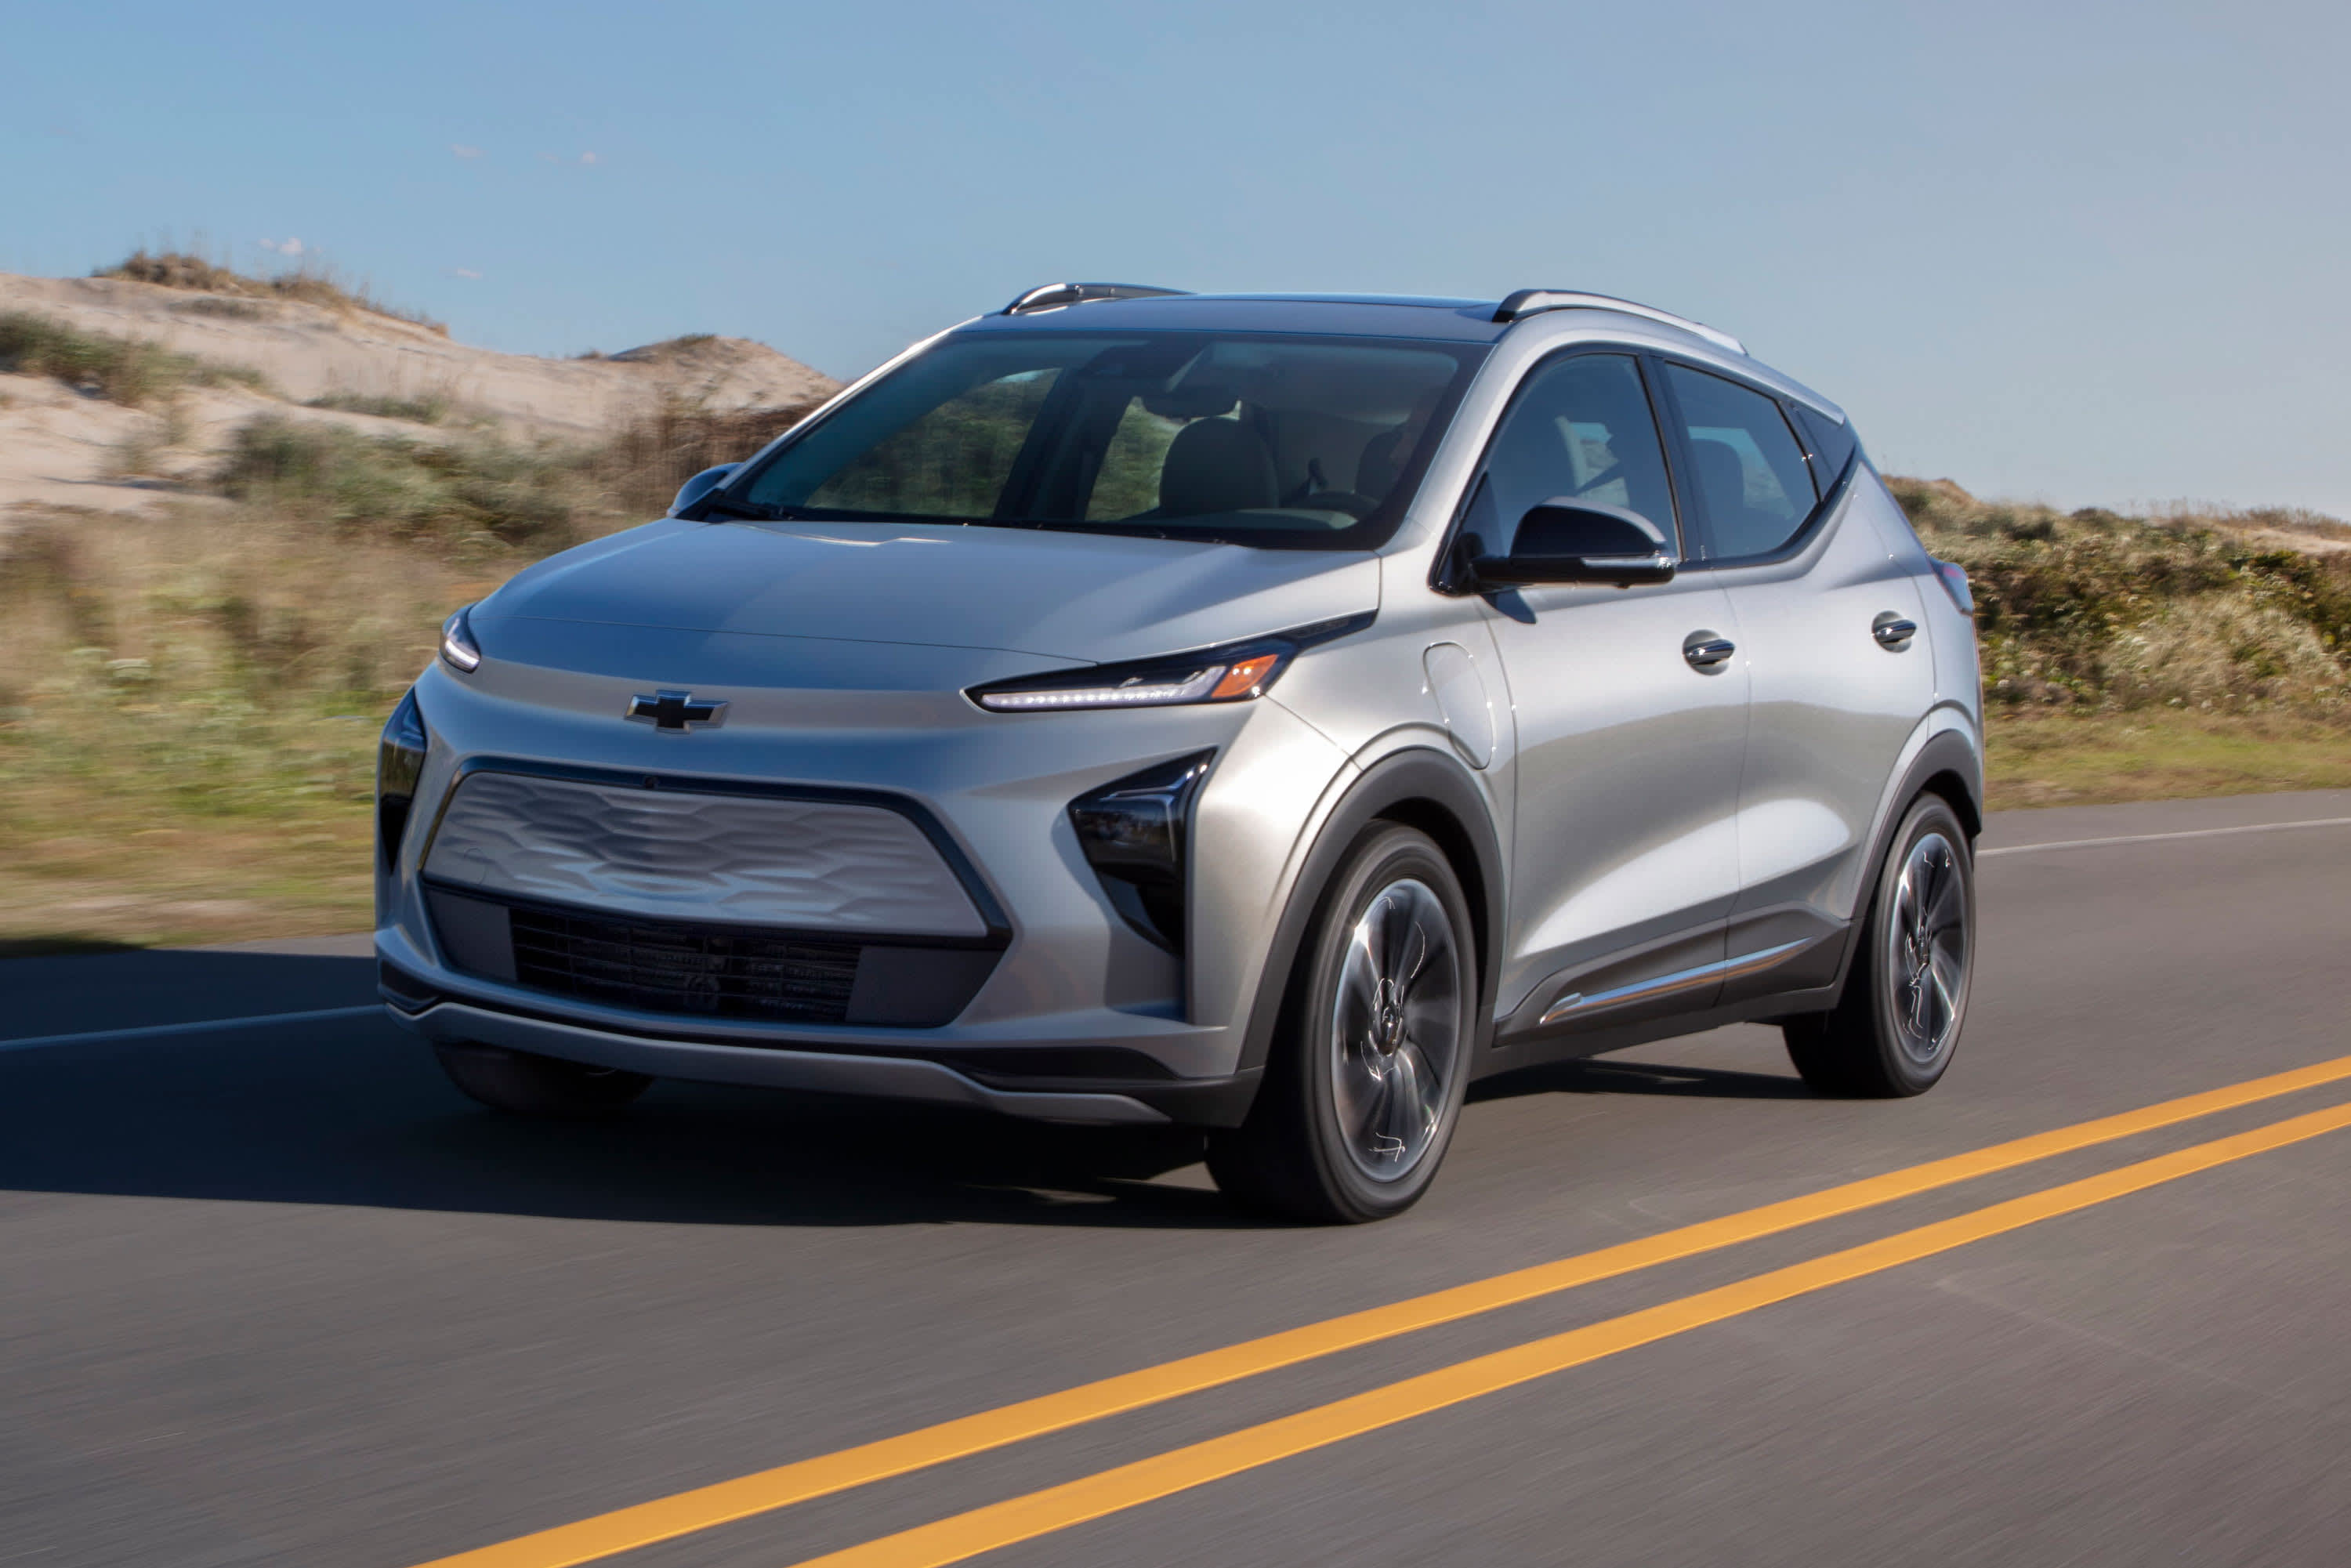 GM’s EV plans begin to take shape with new Chevy Bolts at lower prices